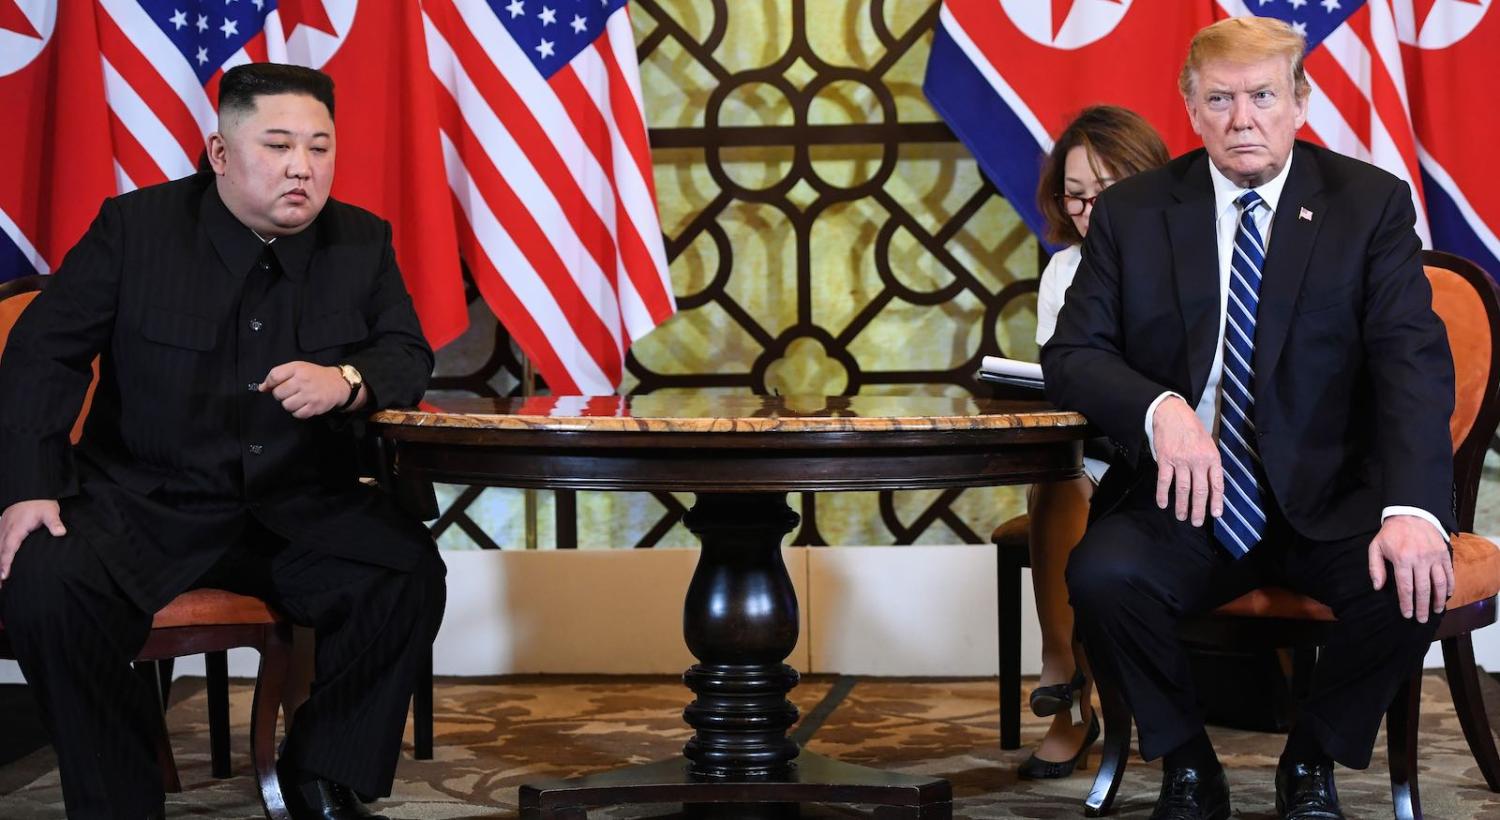 The Hanoi summit ended with a whimper, not the planed grand signing ceremony (Photo: Saul Loeb via Getty)